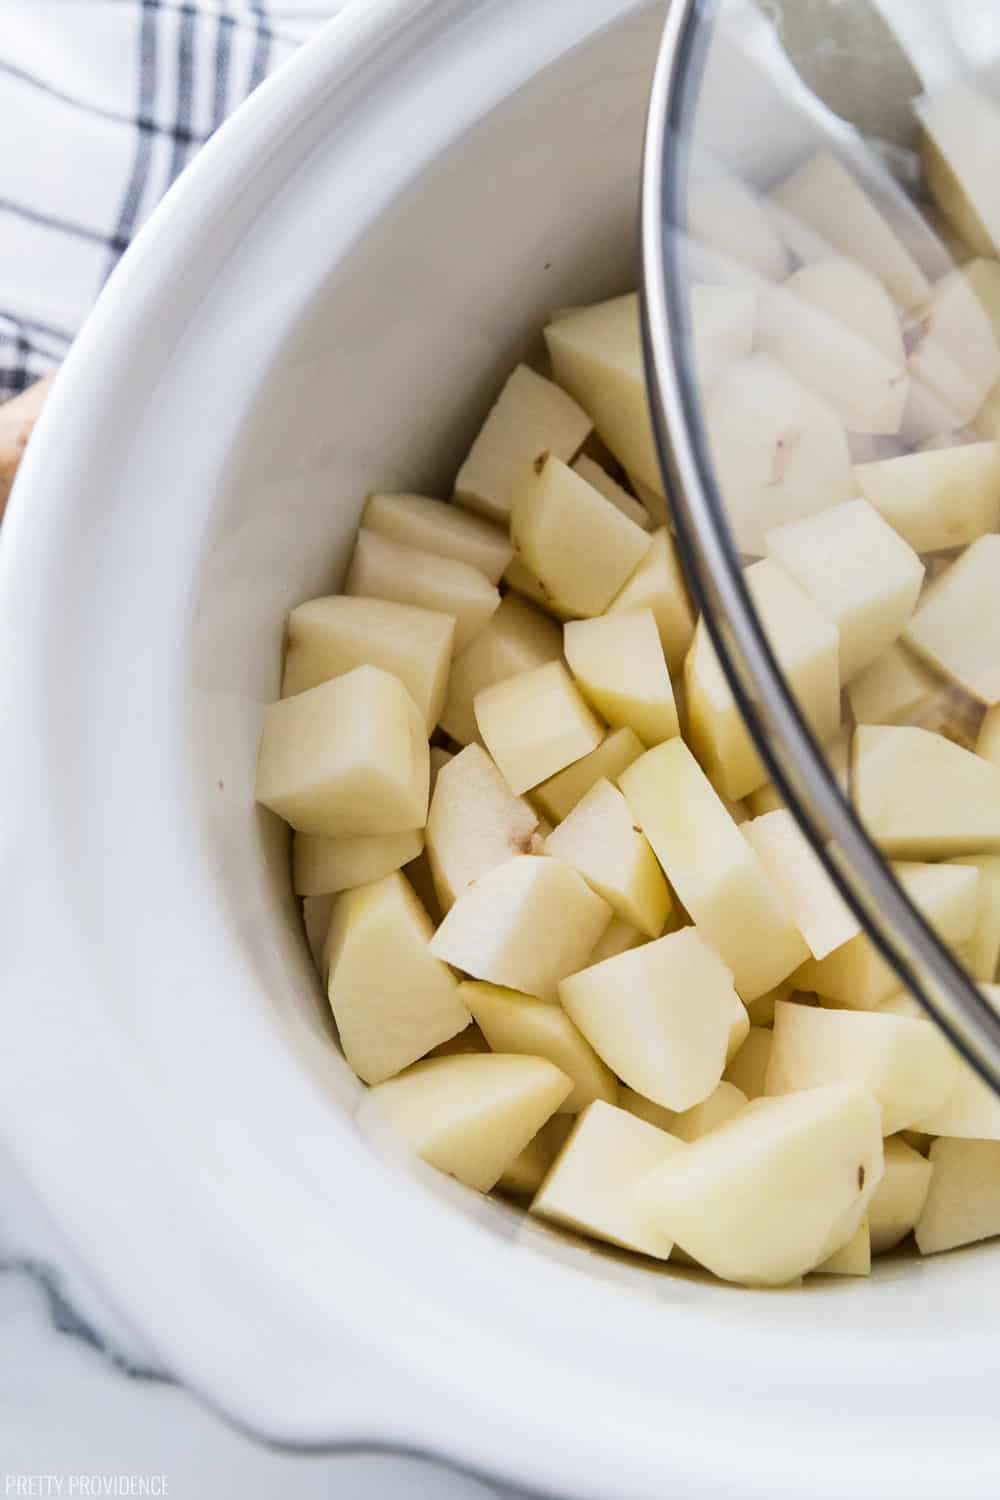 Peeled and chopped potatoes in a white slow cooker with lid being put over it.